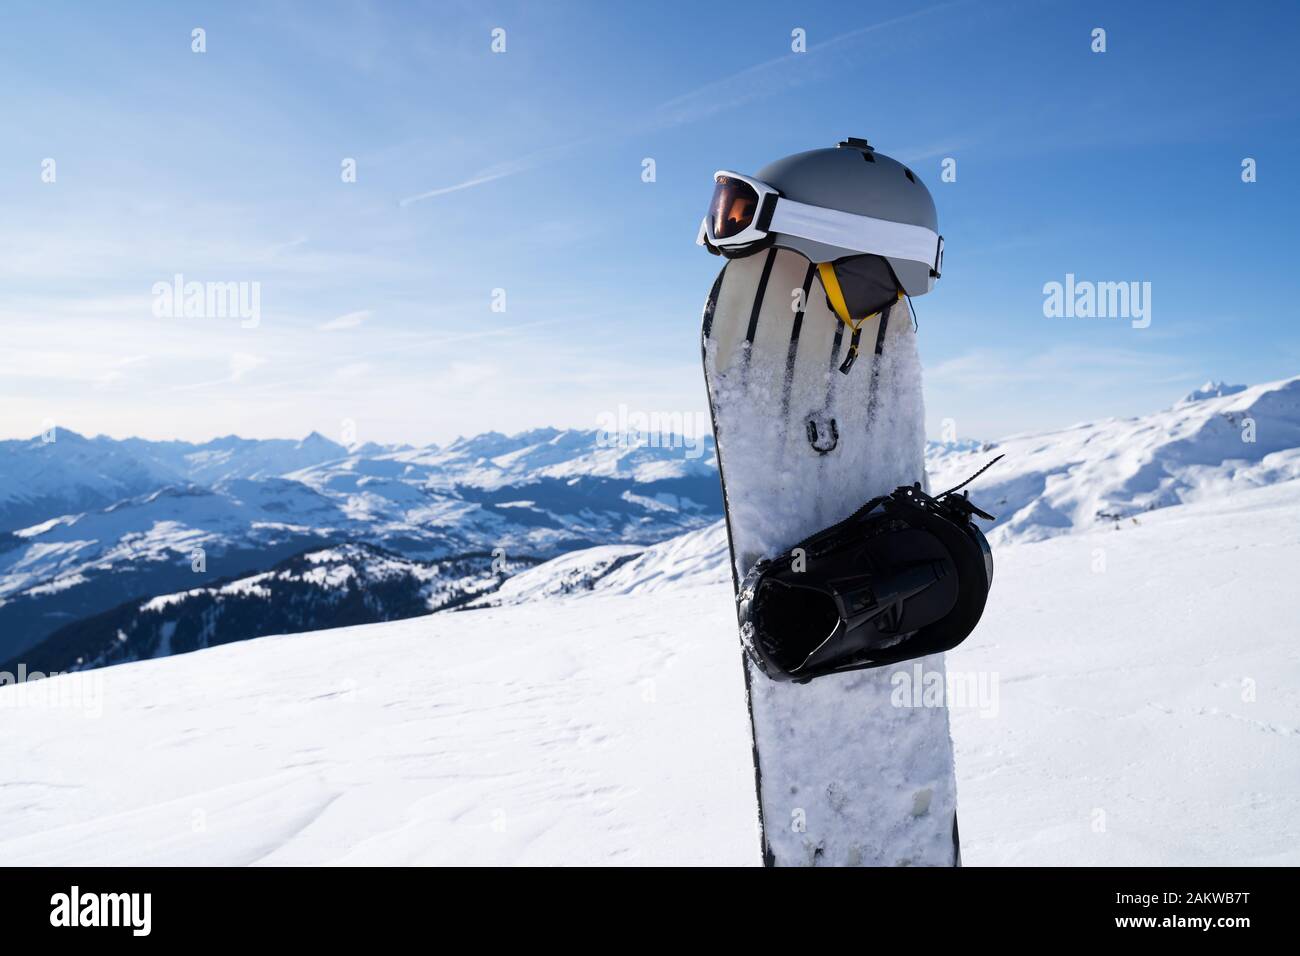 Winter Sports Equipment Against Snowcapped Rocky Mountains Stock Photo